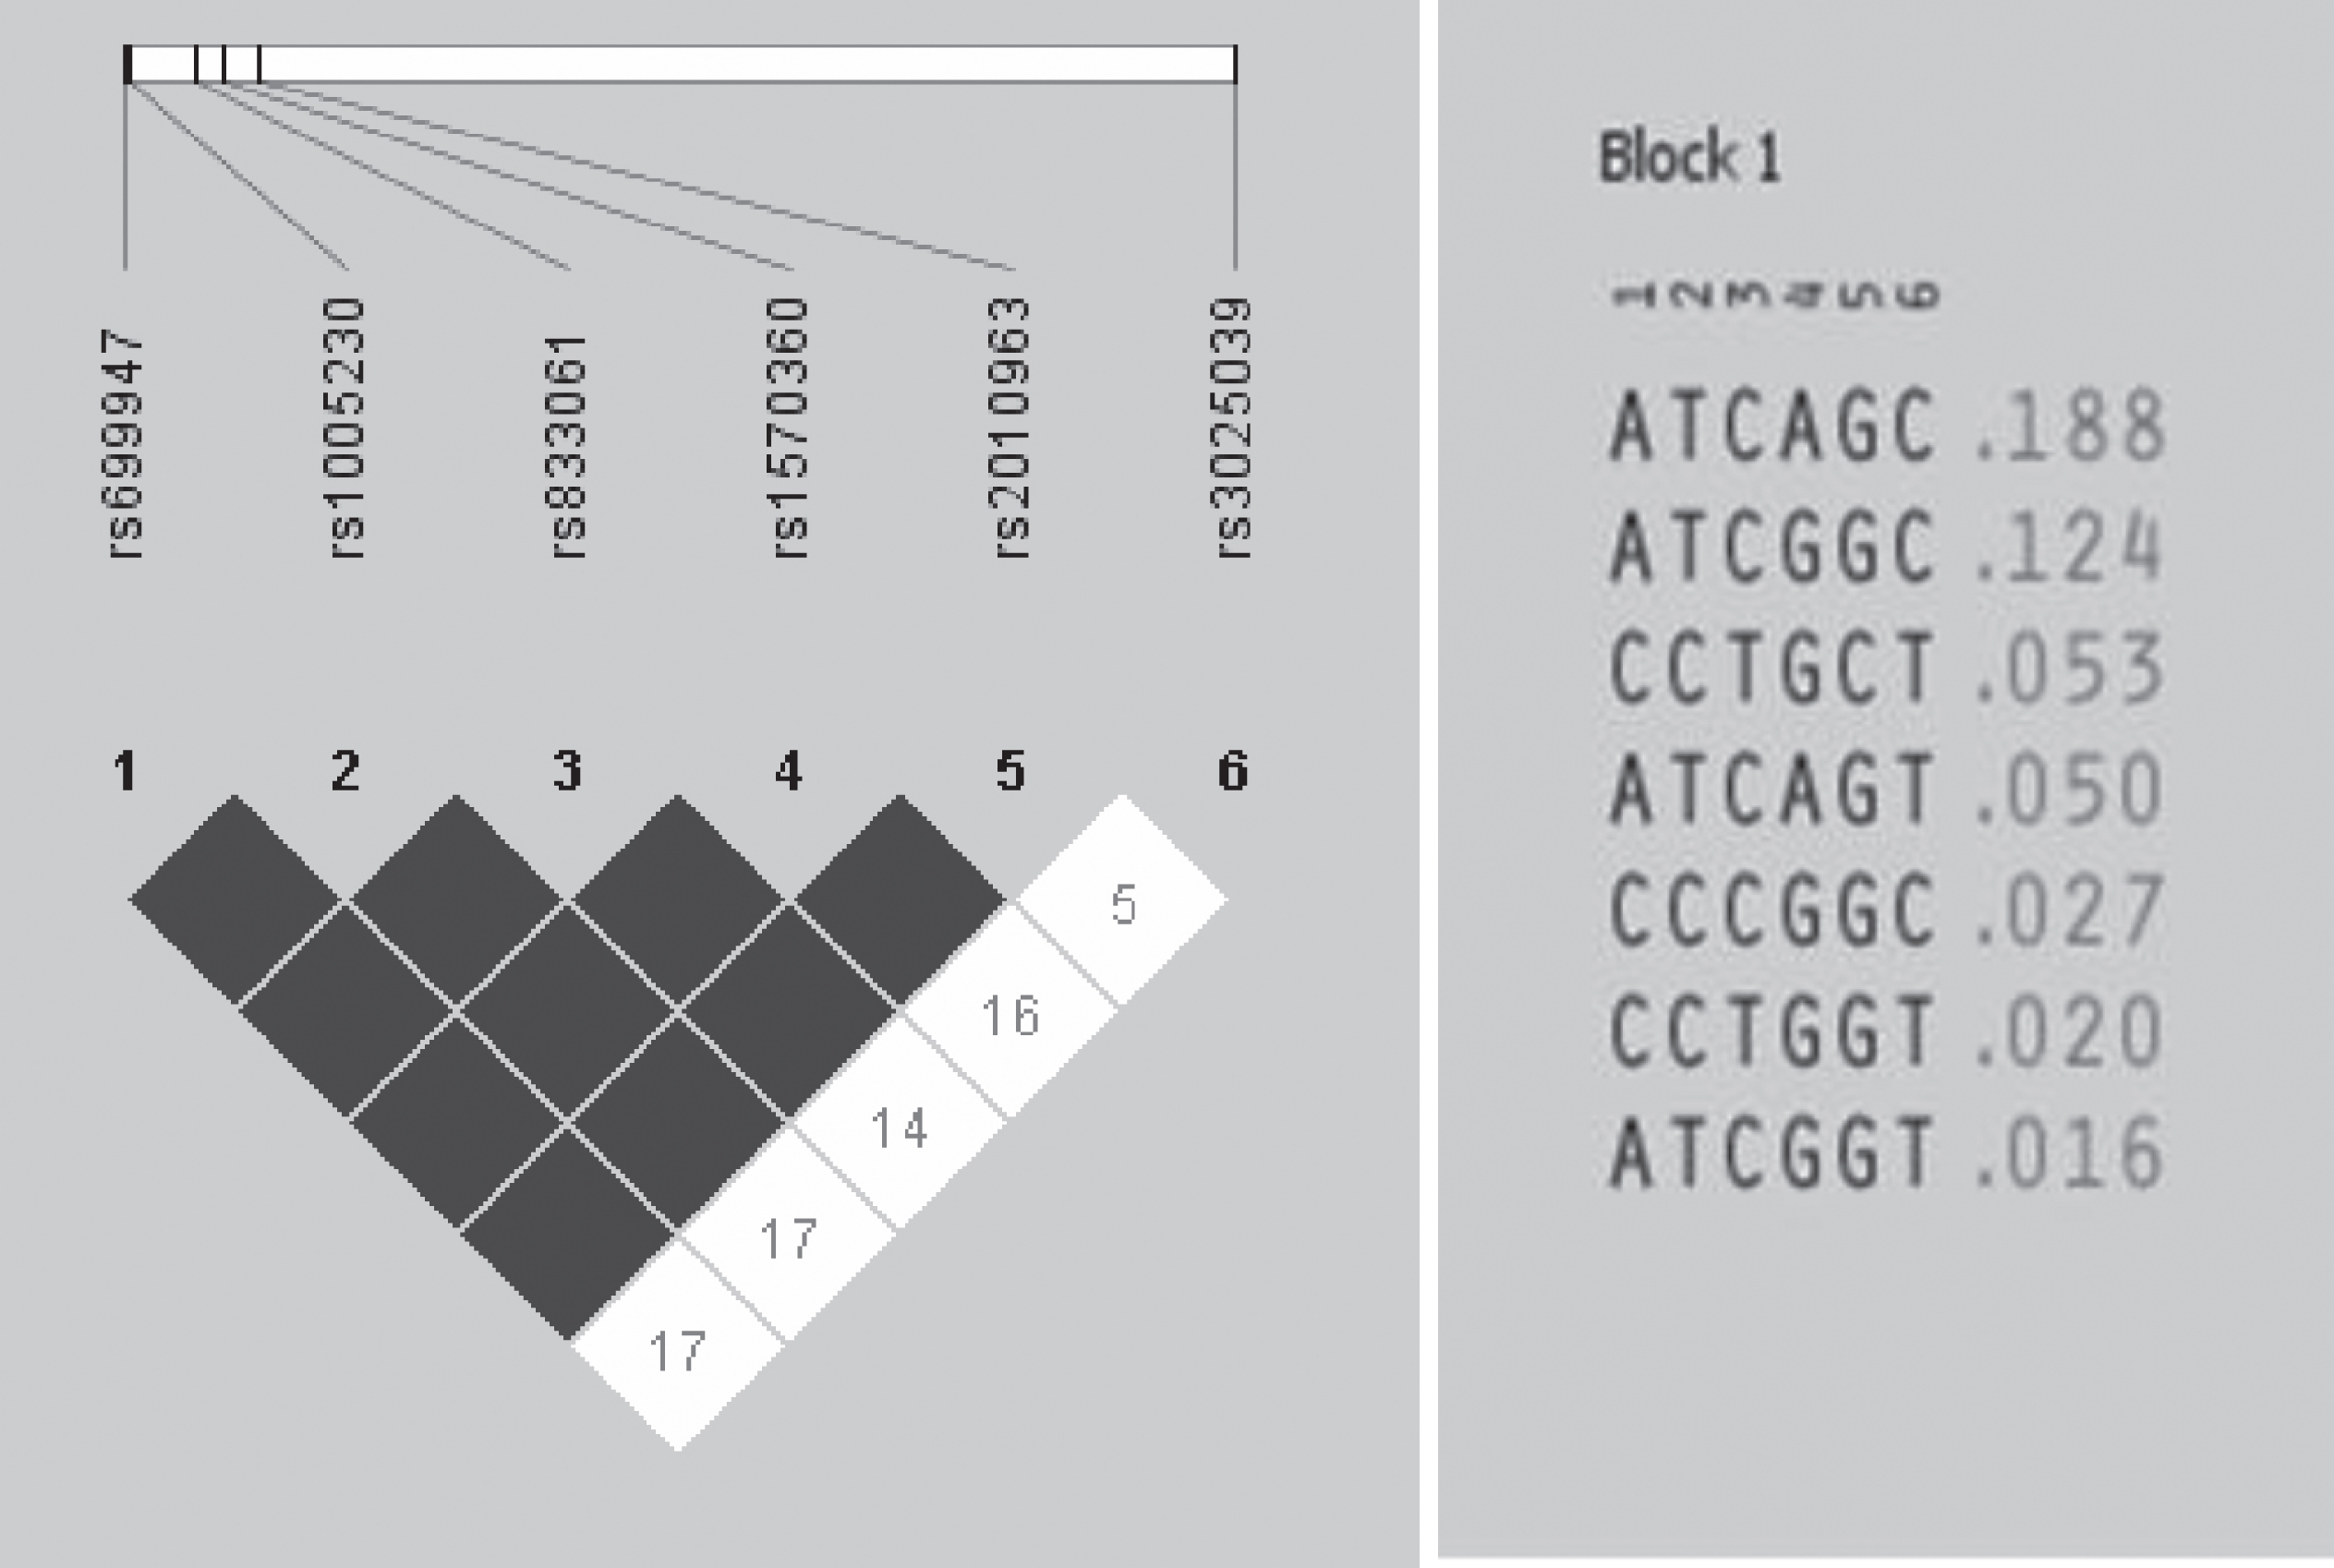 Linkage disequilibrium plot for diffuse large B cell lymphoma patients of single nucleotide variants (SNVs) in the vascular endothelial growth factor-A gene VEGFA -2578C/A (1, rs699947), -2489C/T (2, rs1005230), -460C/T (3, rs833061), -1154G/A (4, rs1570360), -634G/C (5, rs2010963) and +936C/T (6, rs3025039).